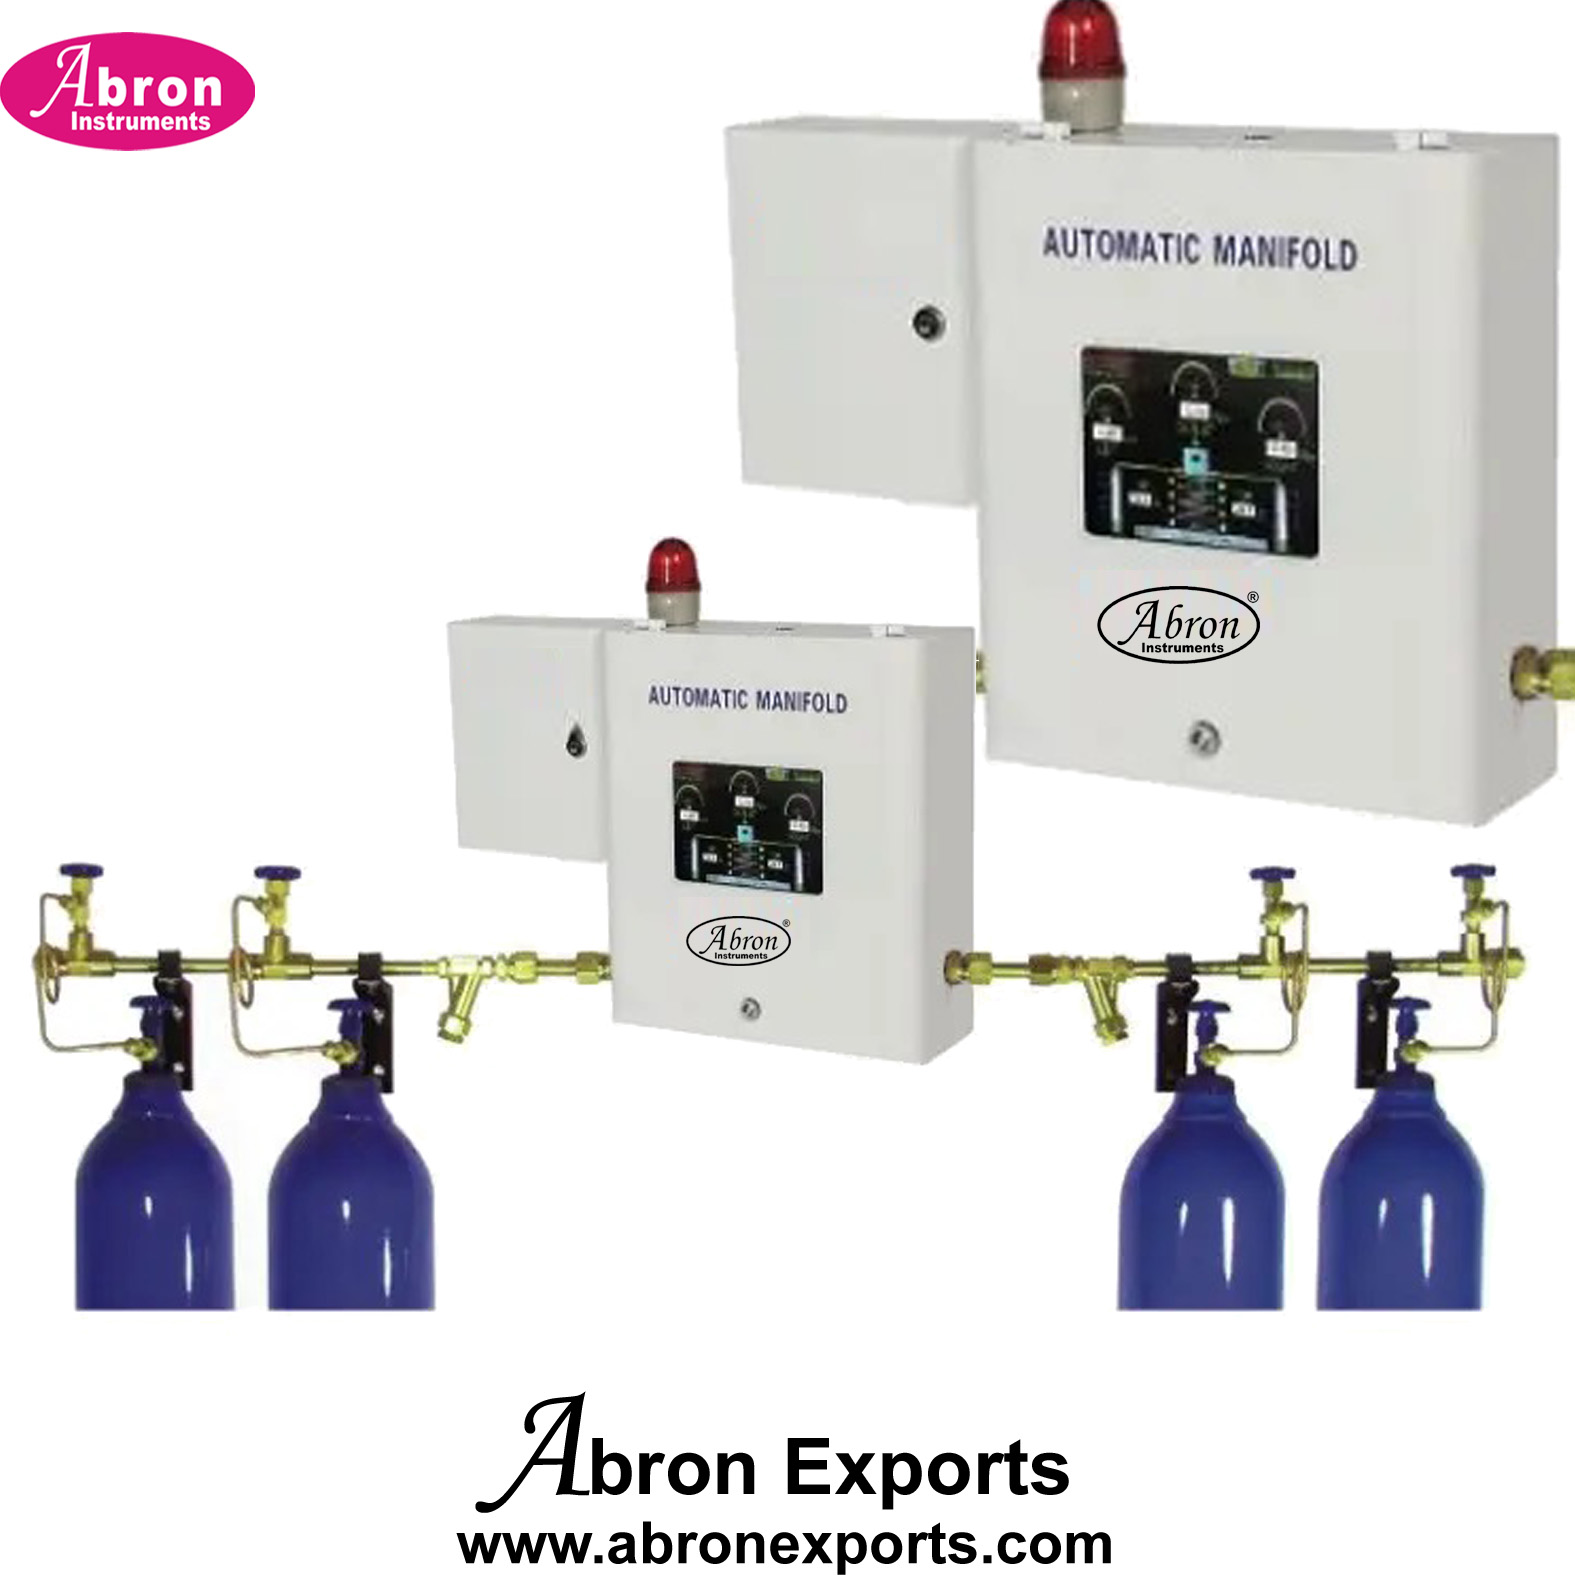 Medical Gas PipelIne Cylinder manifold Automatic controller with 4 cylinder setup controllers set Abron ABM-1123MF4A 